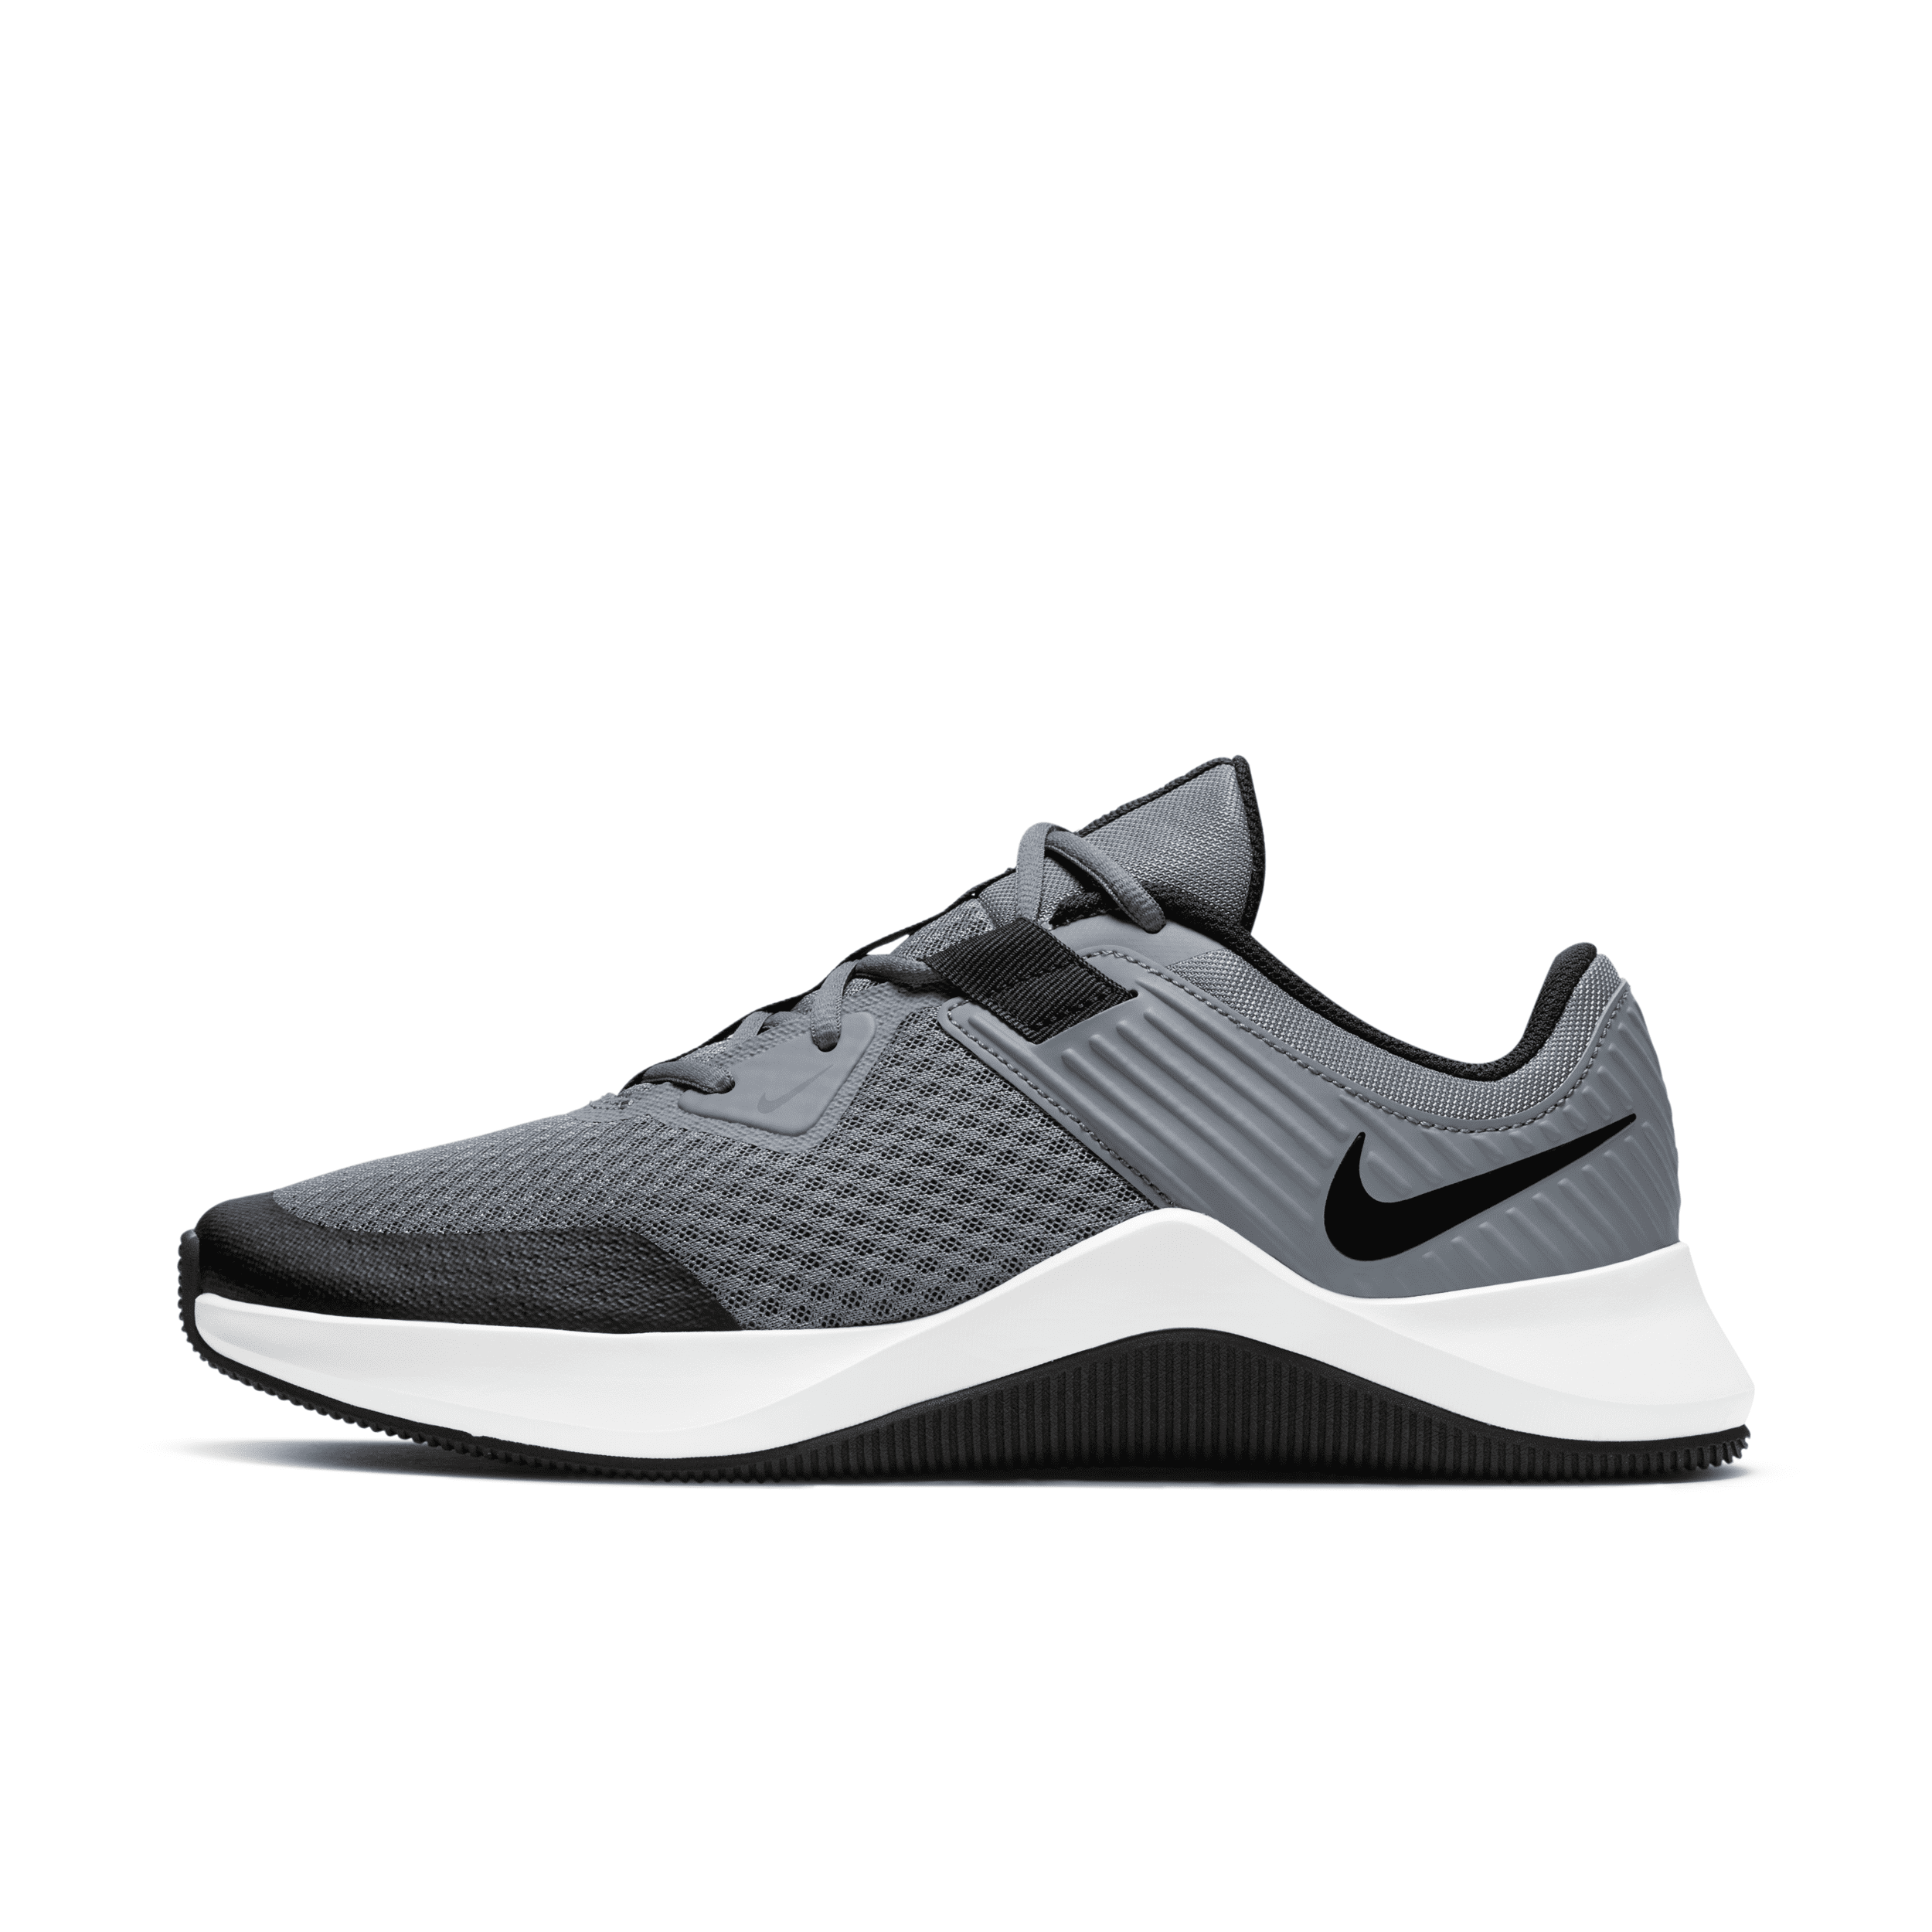 Nike Men's MC Trainer Training Shoes in Grey, Size: 7.5 | CU3580-001